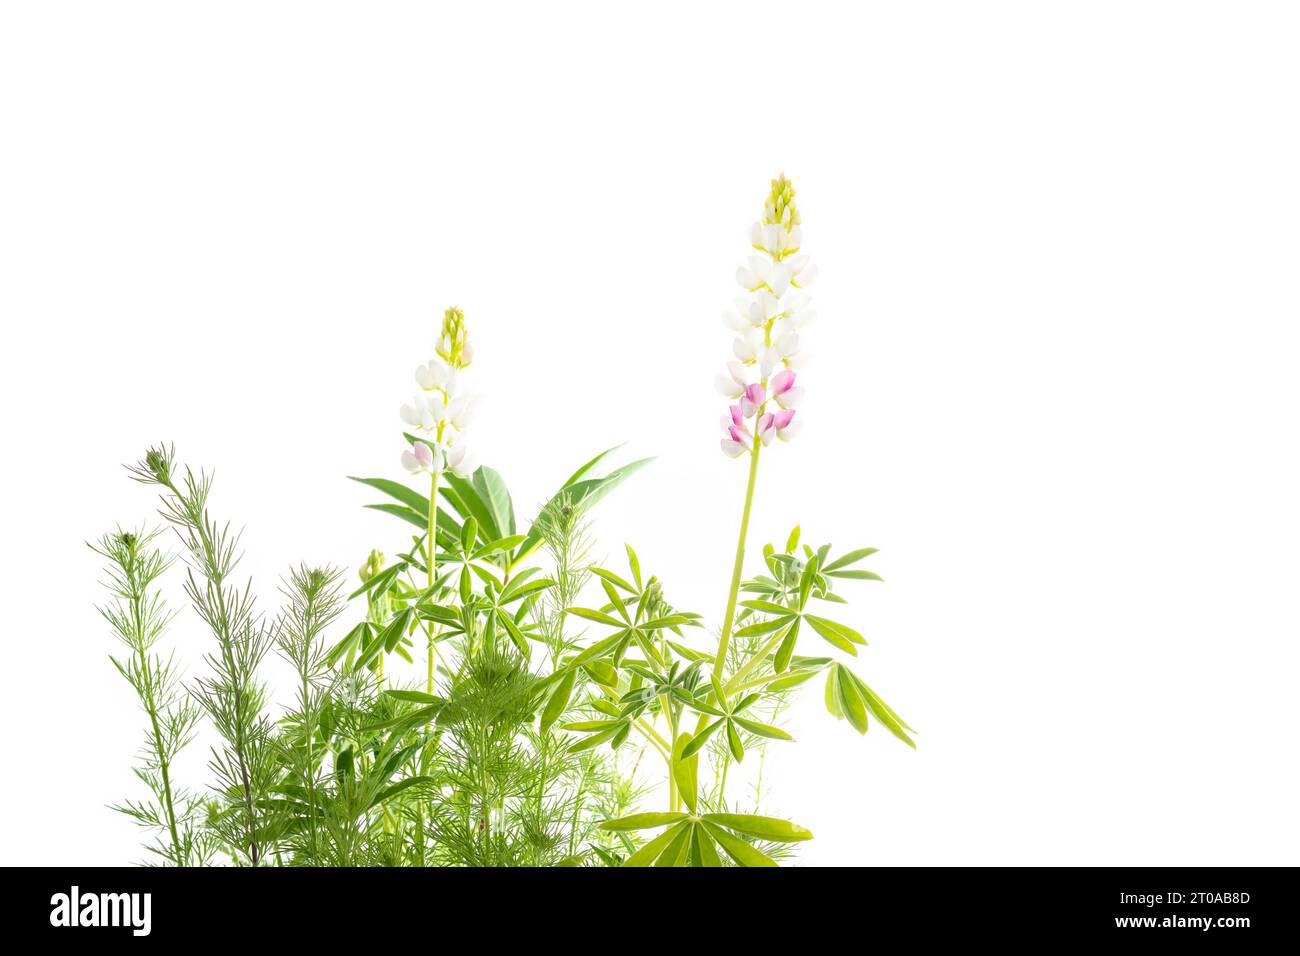 Isolated wildflowers with copy space. Beautiful set of wild flowers with flowering Lupinus elegans Pink Fairy and Rocket Larkspur flower buds. Humming Stock Photo